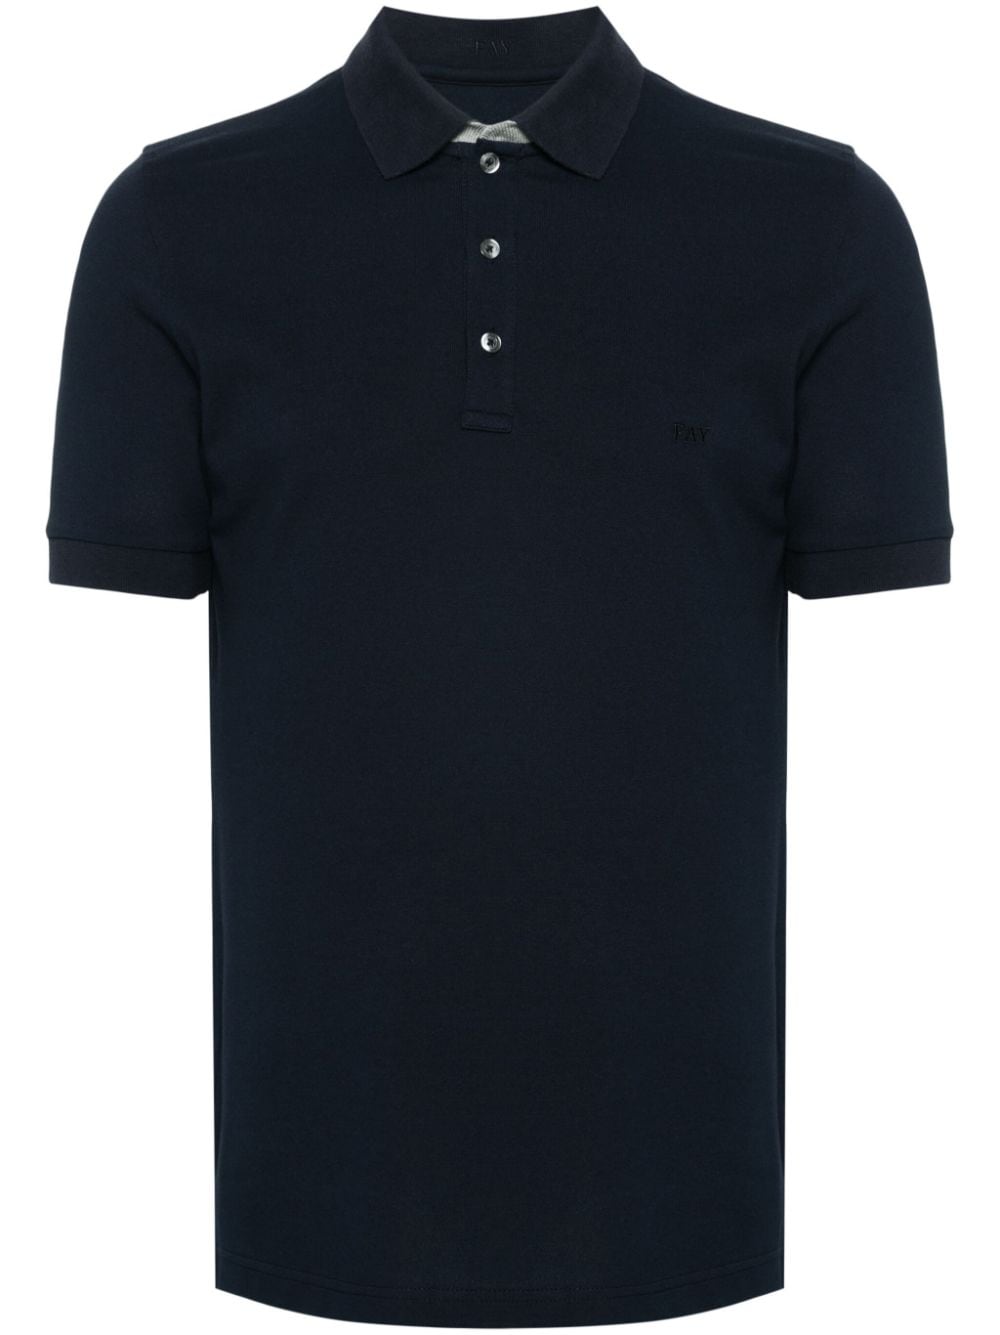 Blue polo shirt with embroidery